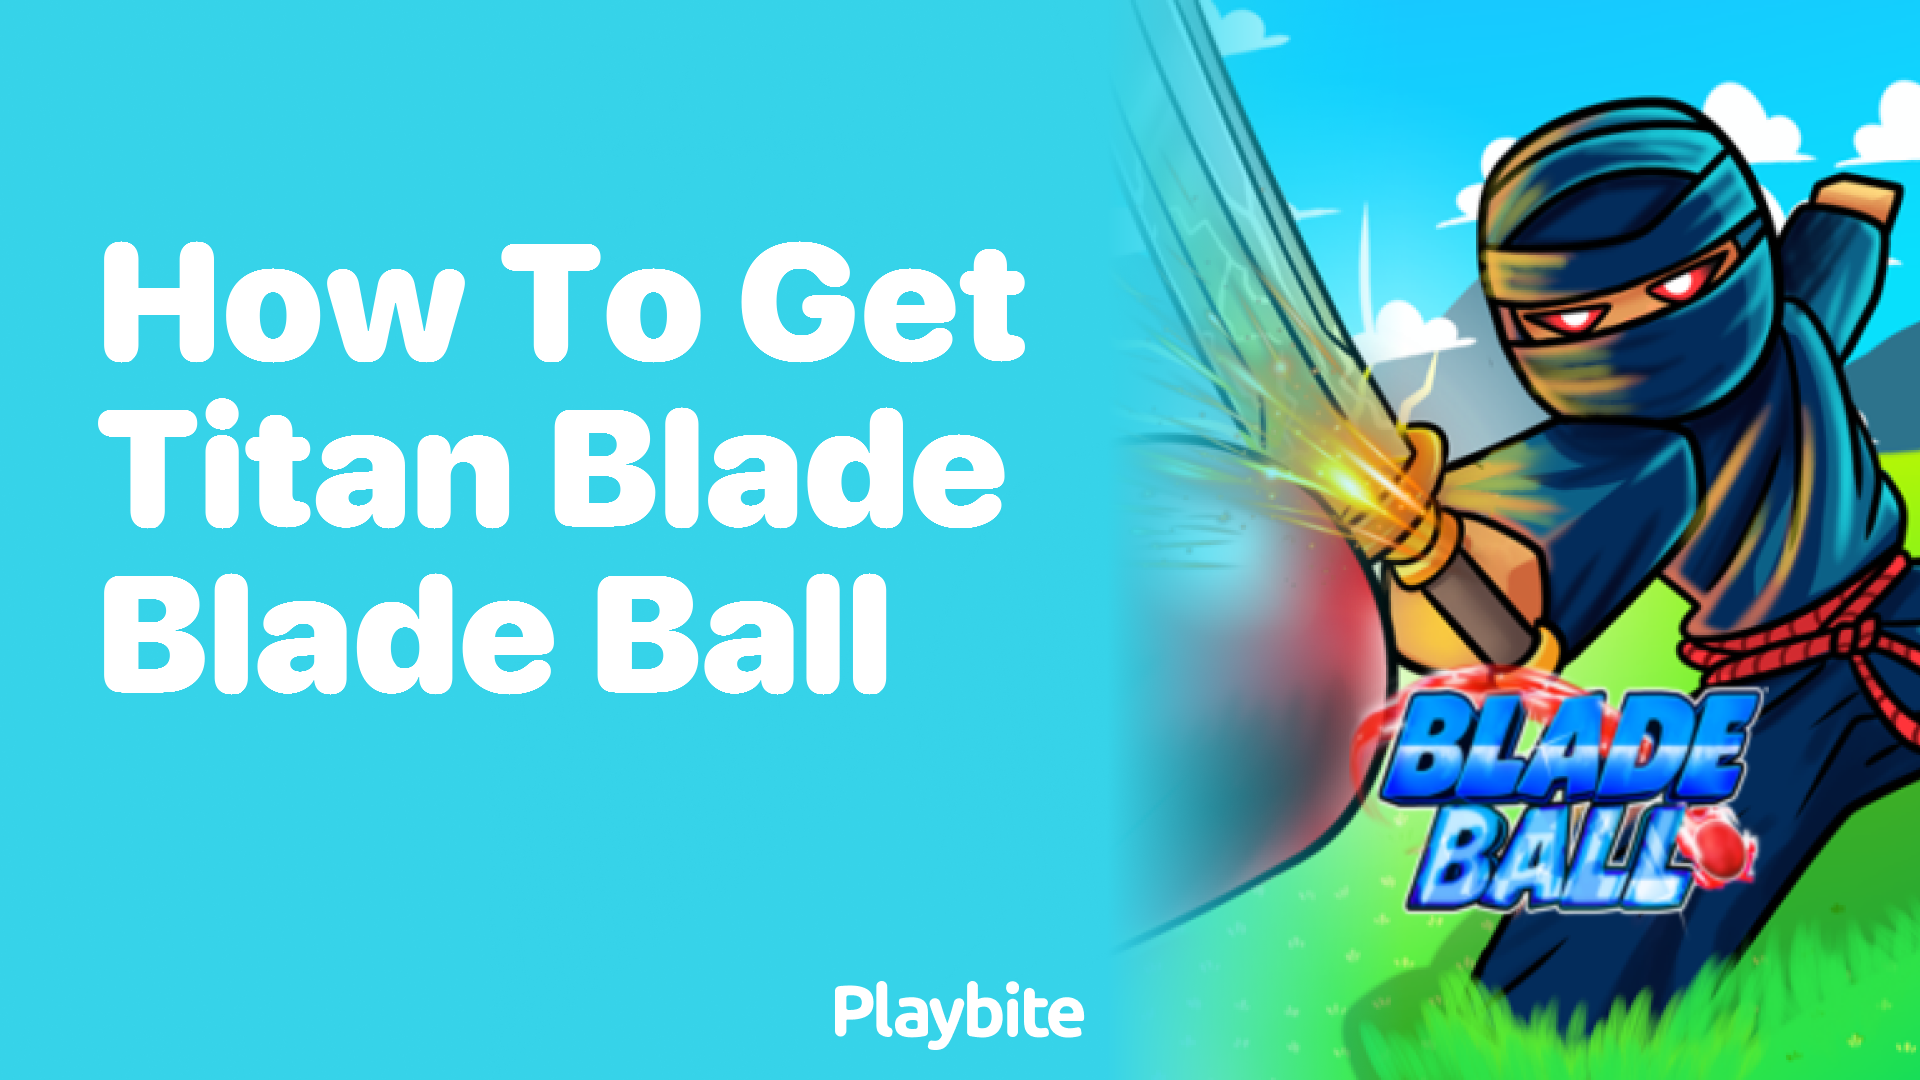 How to Get the Titan Blade in Blade Ball